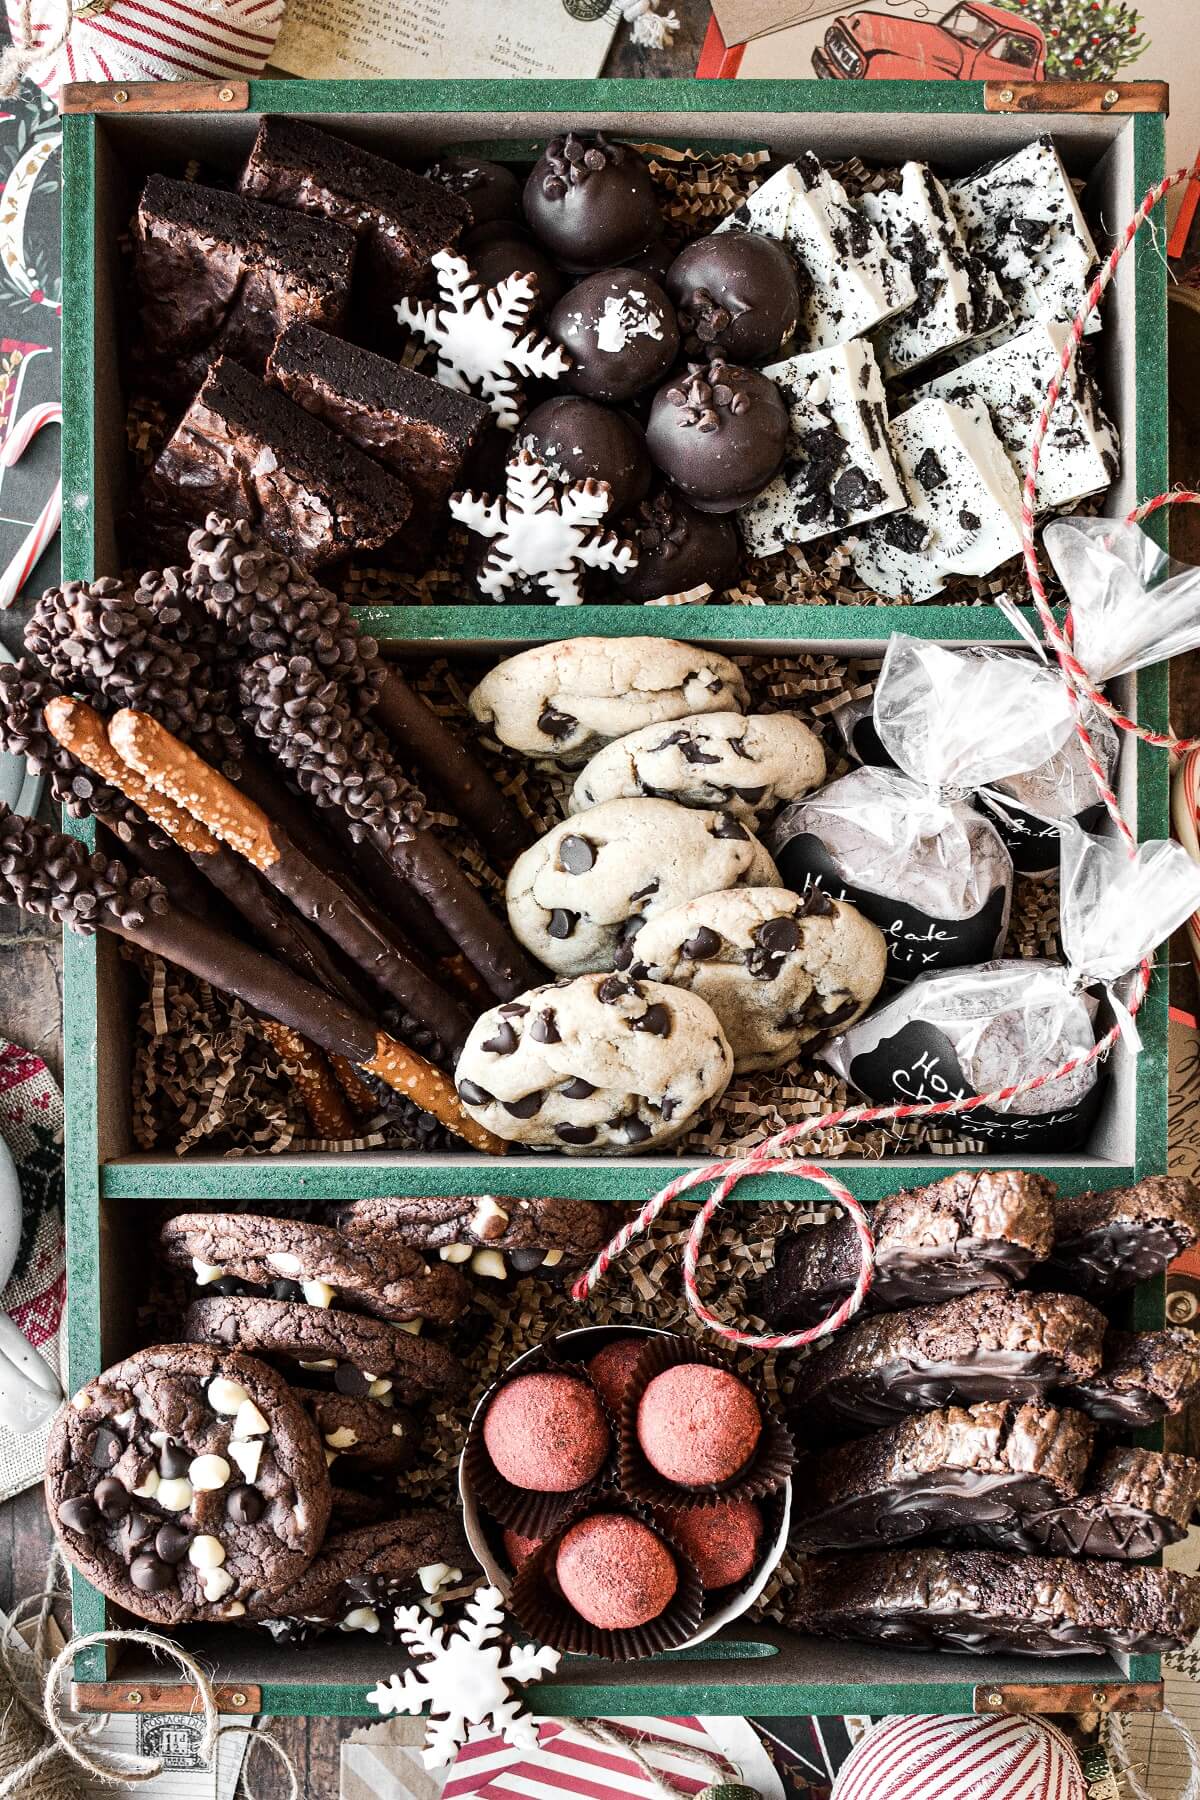 A green wooden box filled with an assortment of chocolate cookies and treats for Christmas.